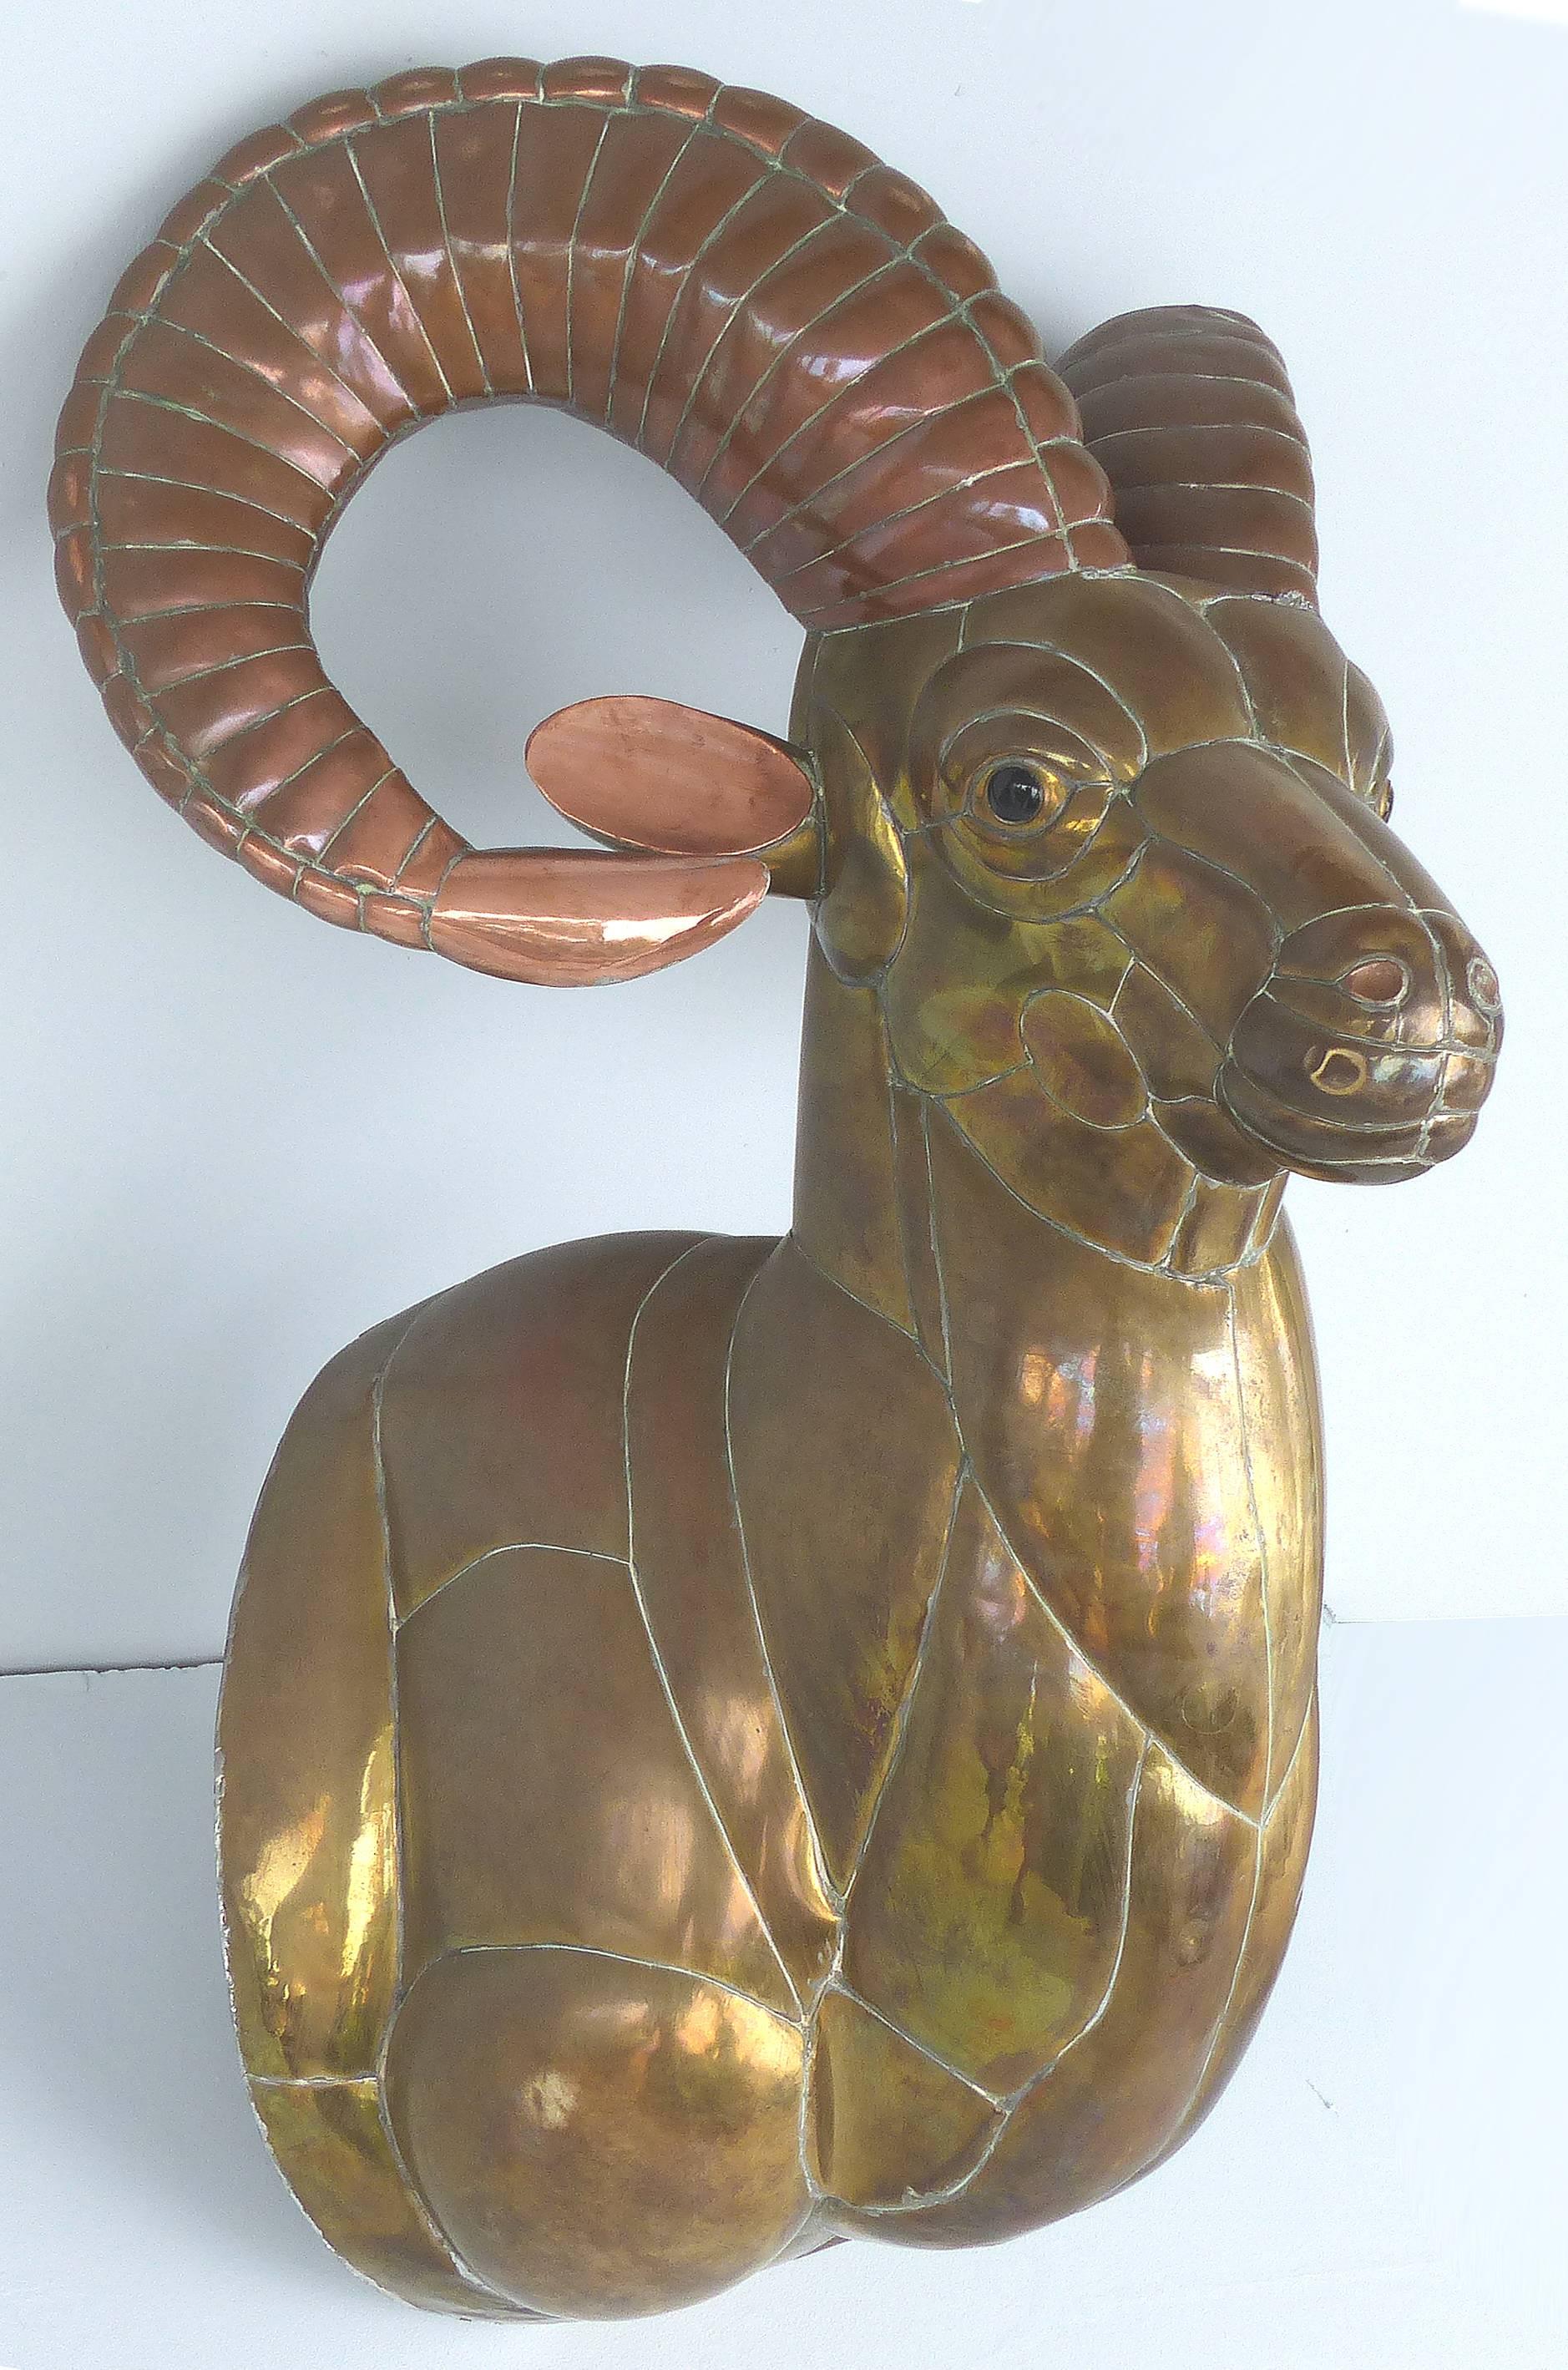 Sergio Bustamante 1970s Mexican mixed metals Ram's Head wall sculpture

Offered for sale is a large and impressive mixed metals wall sculpture by renowned Mexican artist Sergio Bustamente, circa 1970s. Bustamante was born in 1949 and lived most of